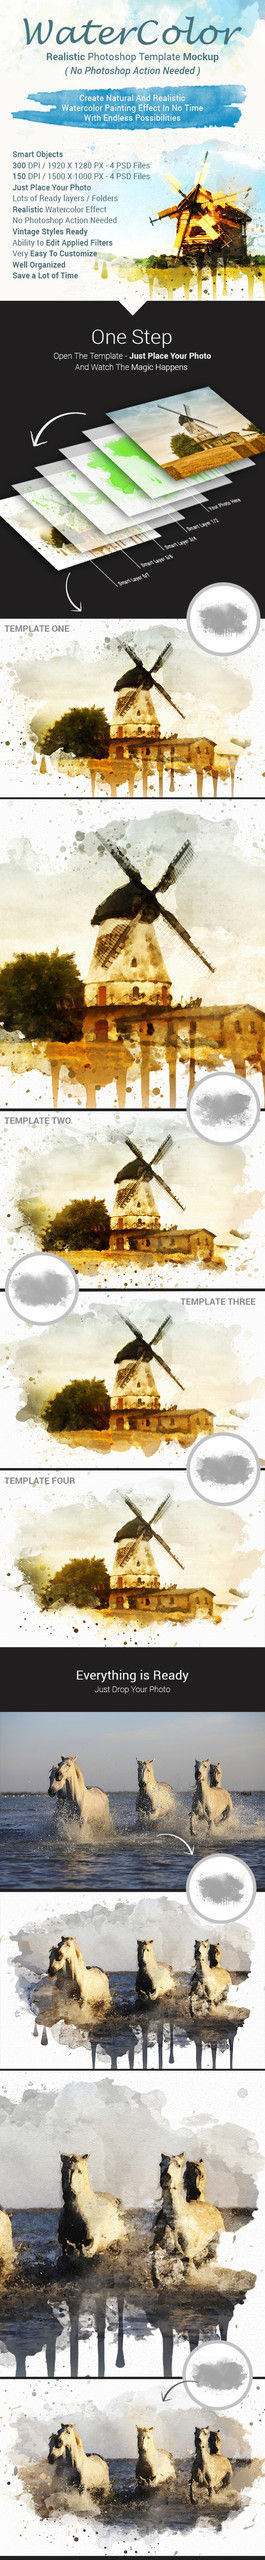 Realistic Watercolor Photoshop Psd Template Mock-Ups